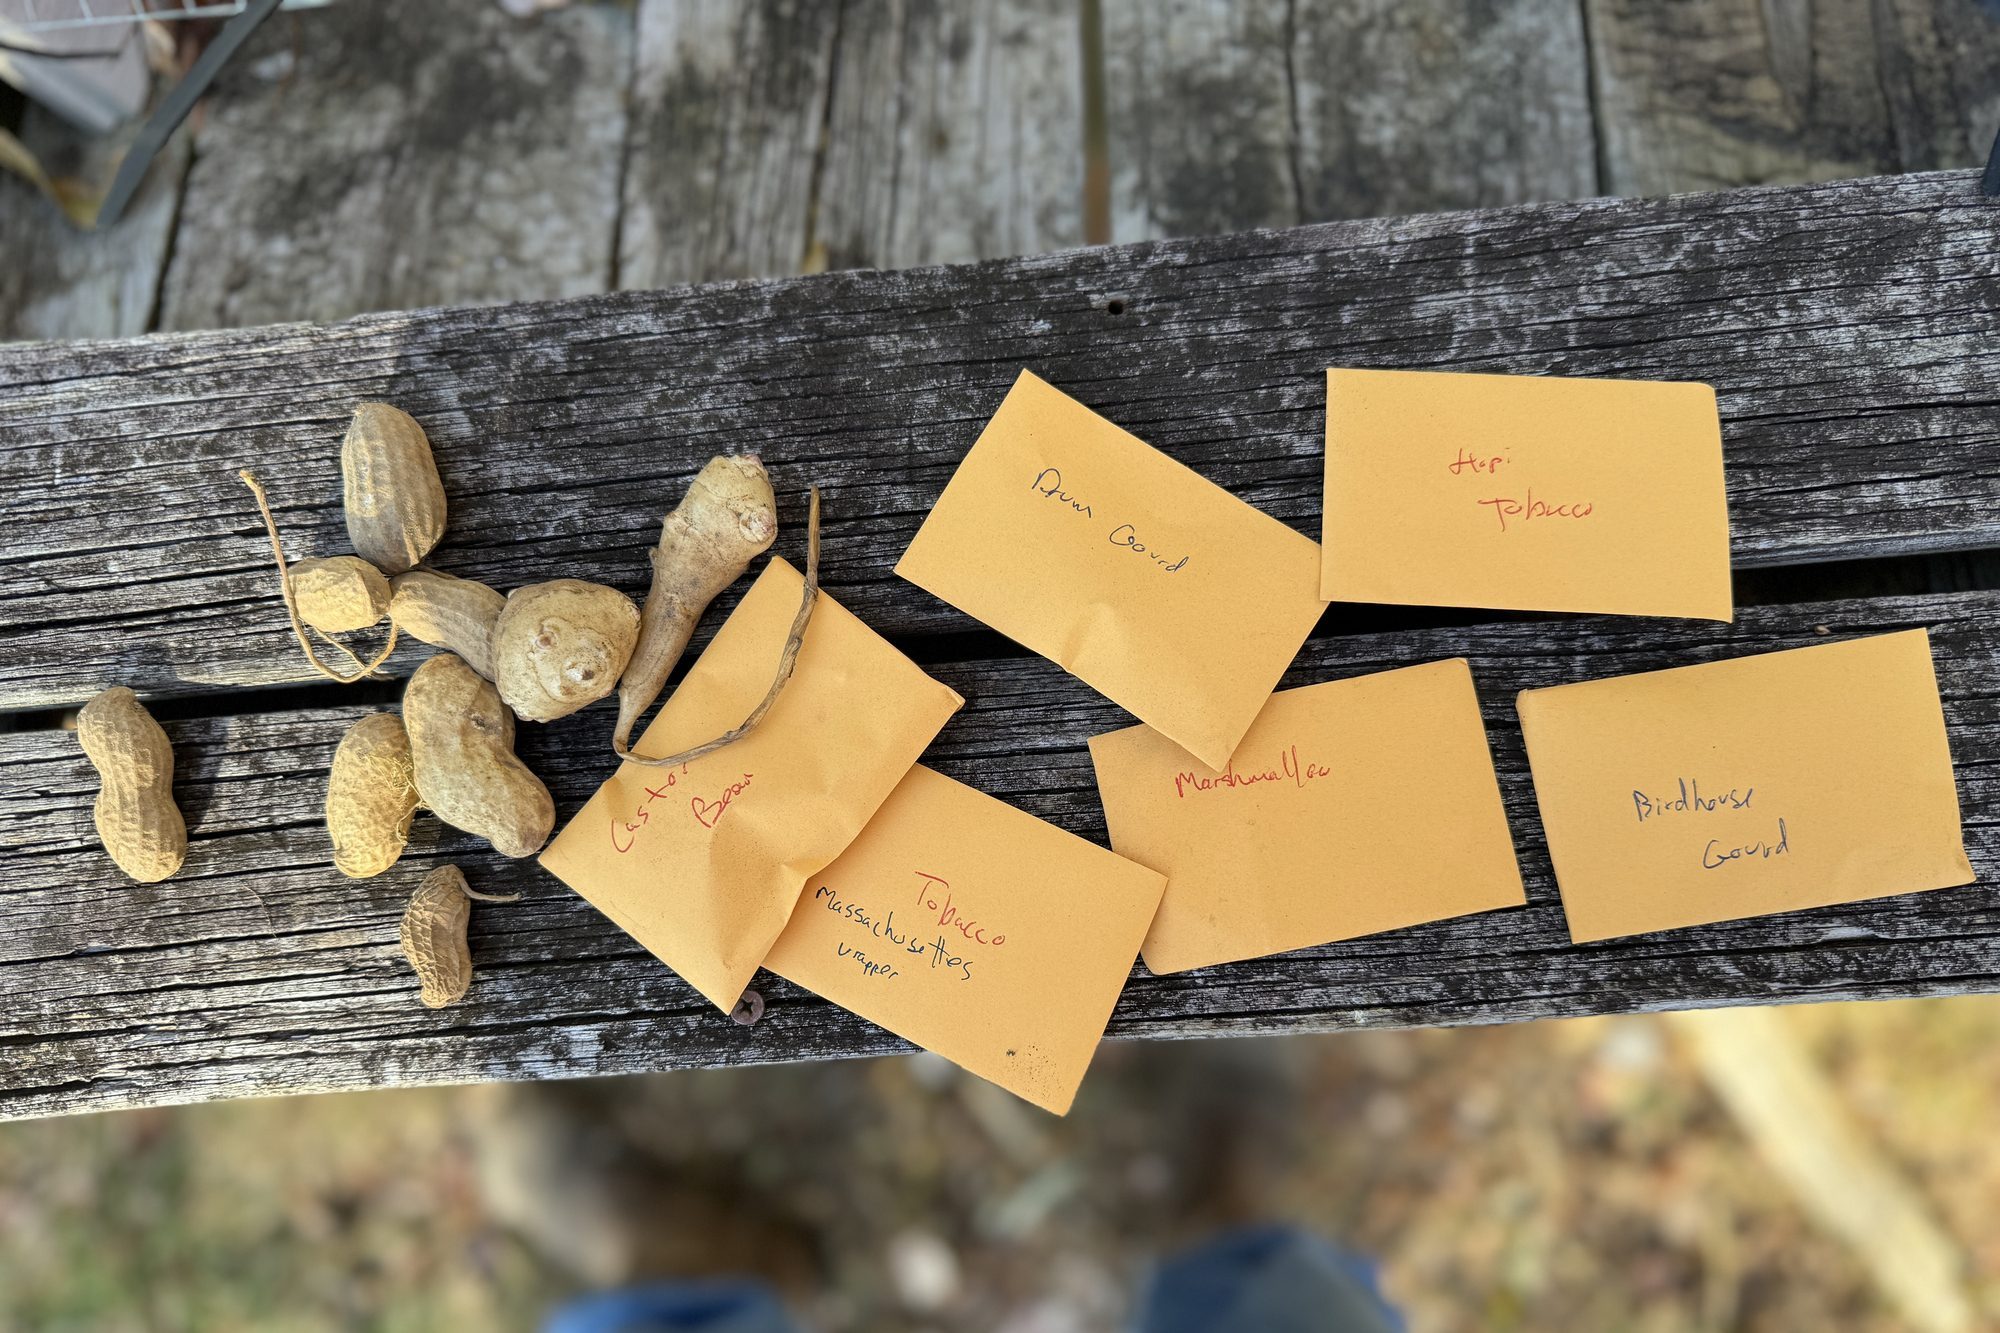 Various seeds and small manilla seed packets with hand writing on them lying on a rustic wooden bench.